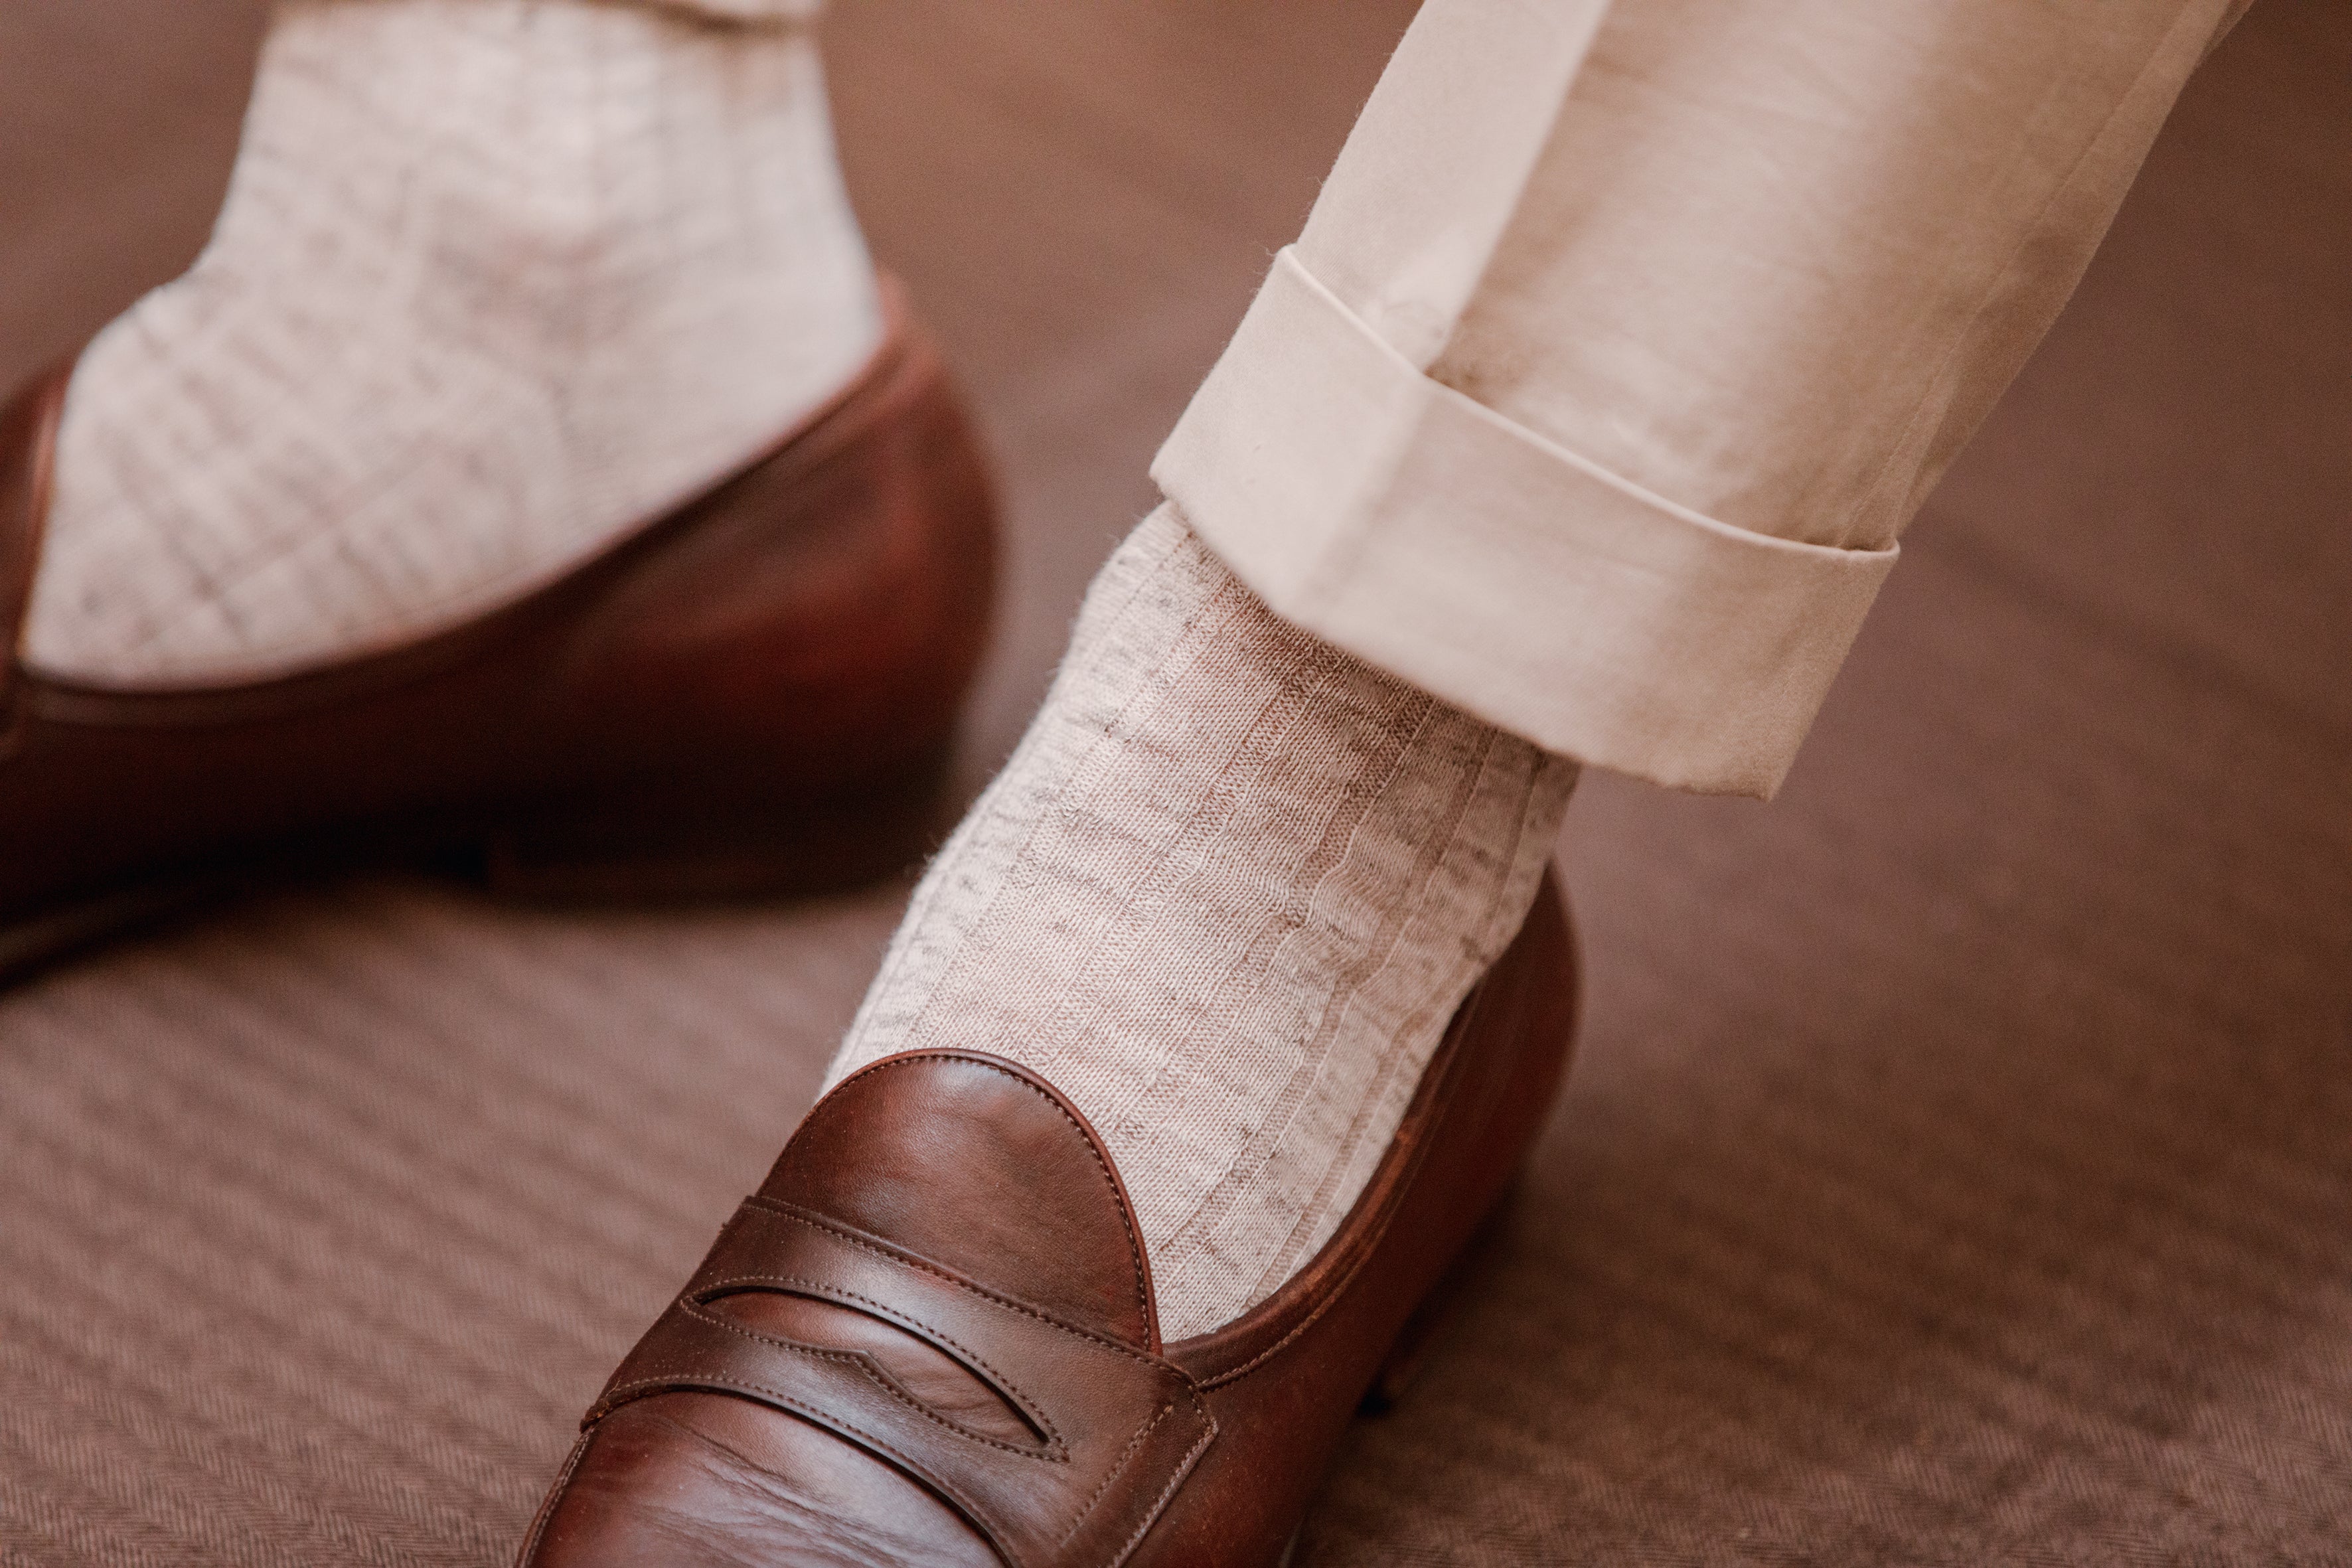 Chaussettes blanches Distinguished Homme